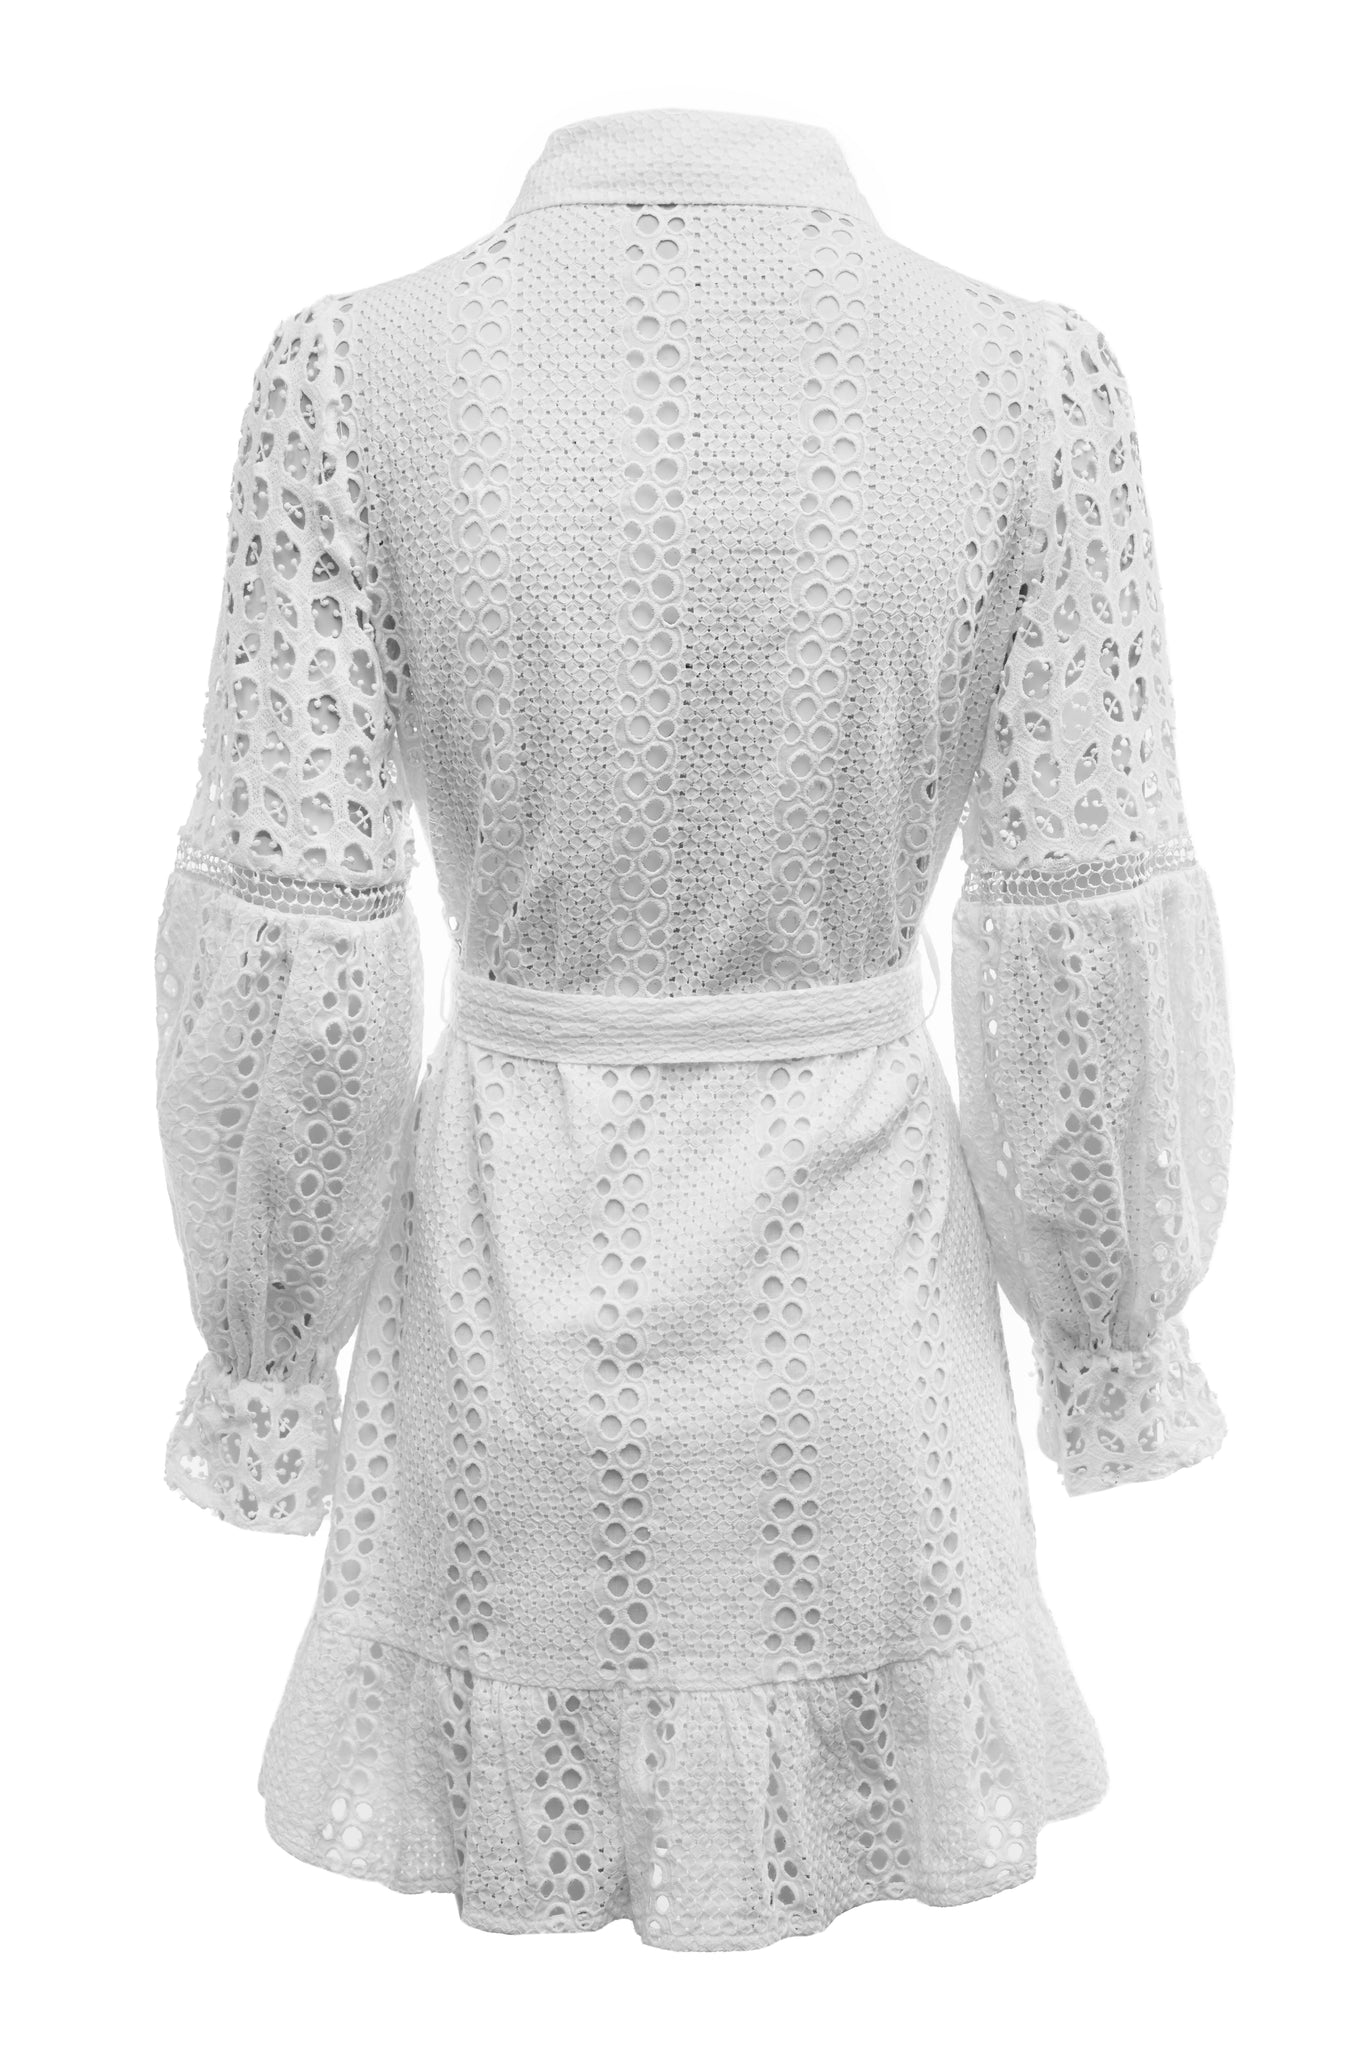 Back shot of womens white mini dress in broderie lace with a tie around waist with natural raffia bag